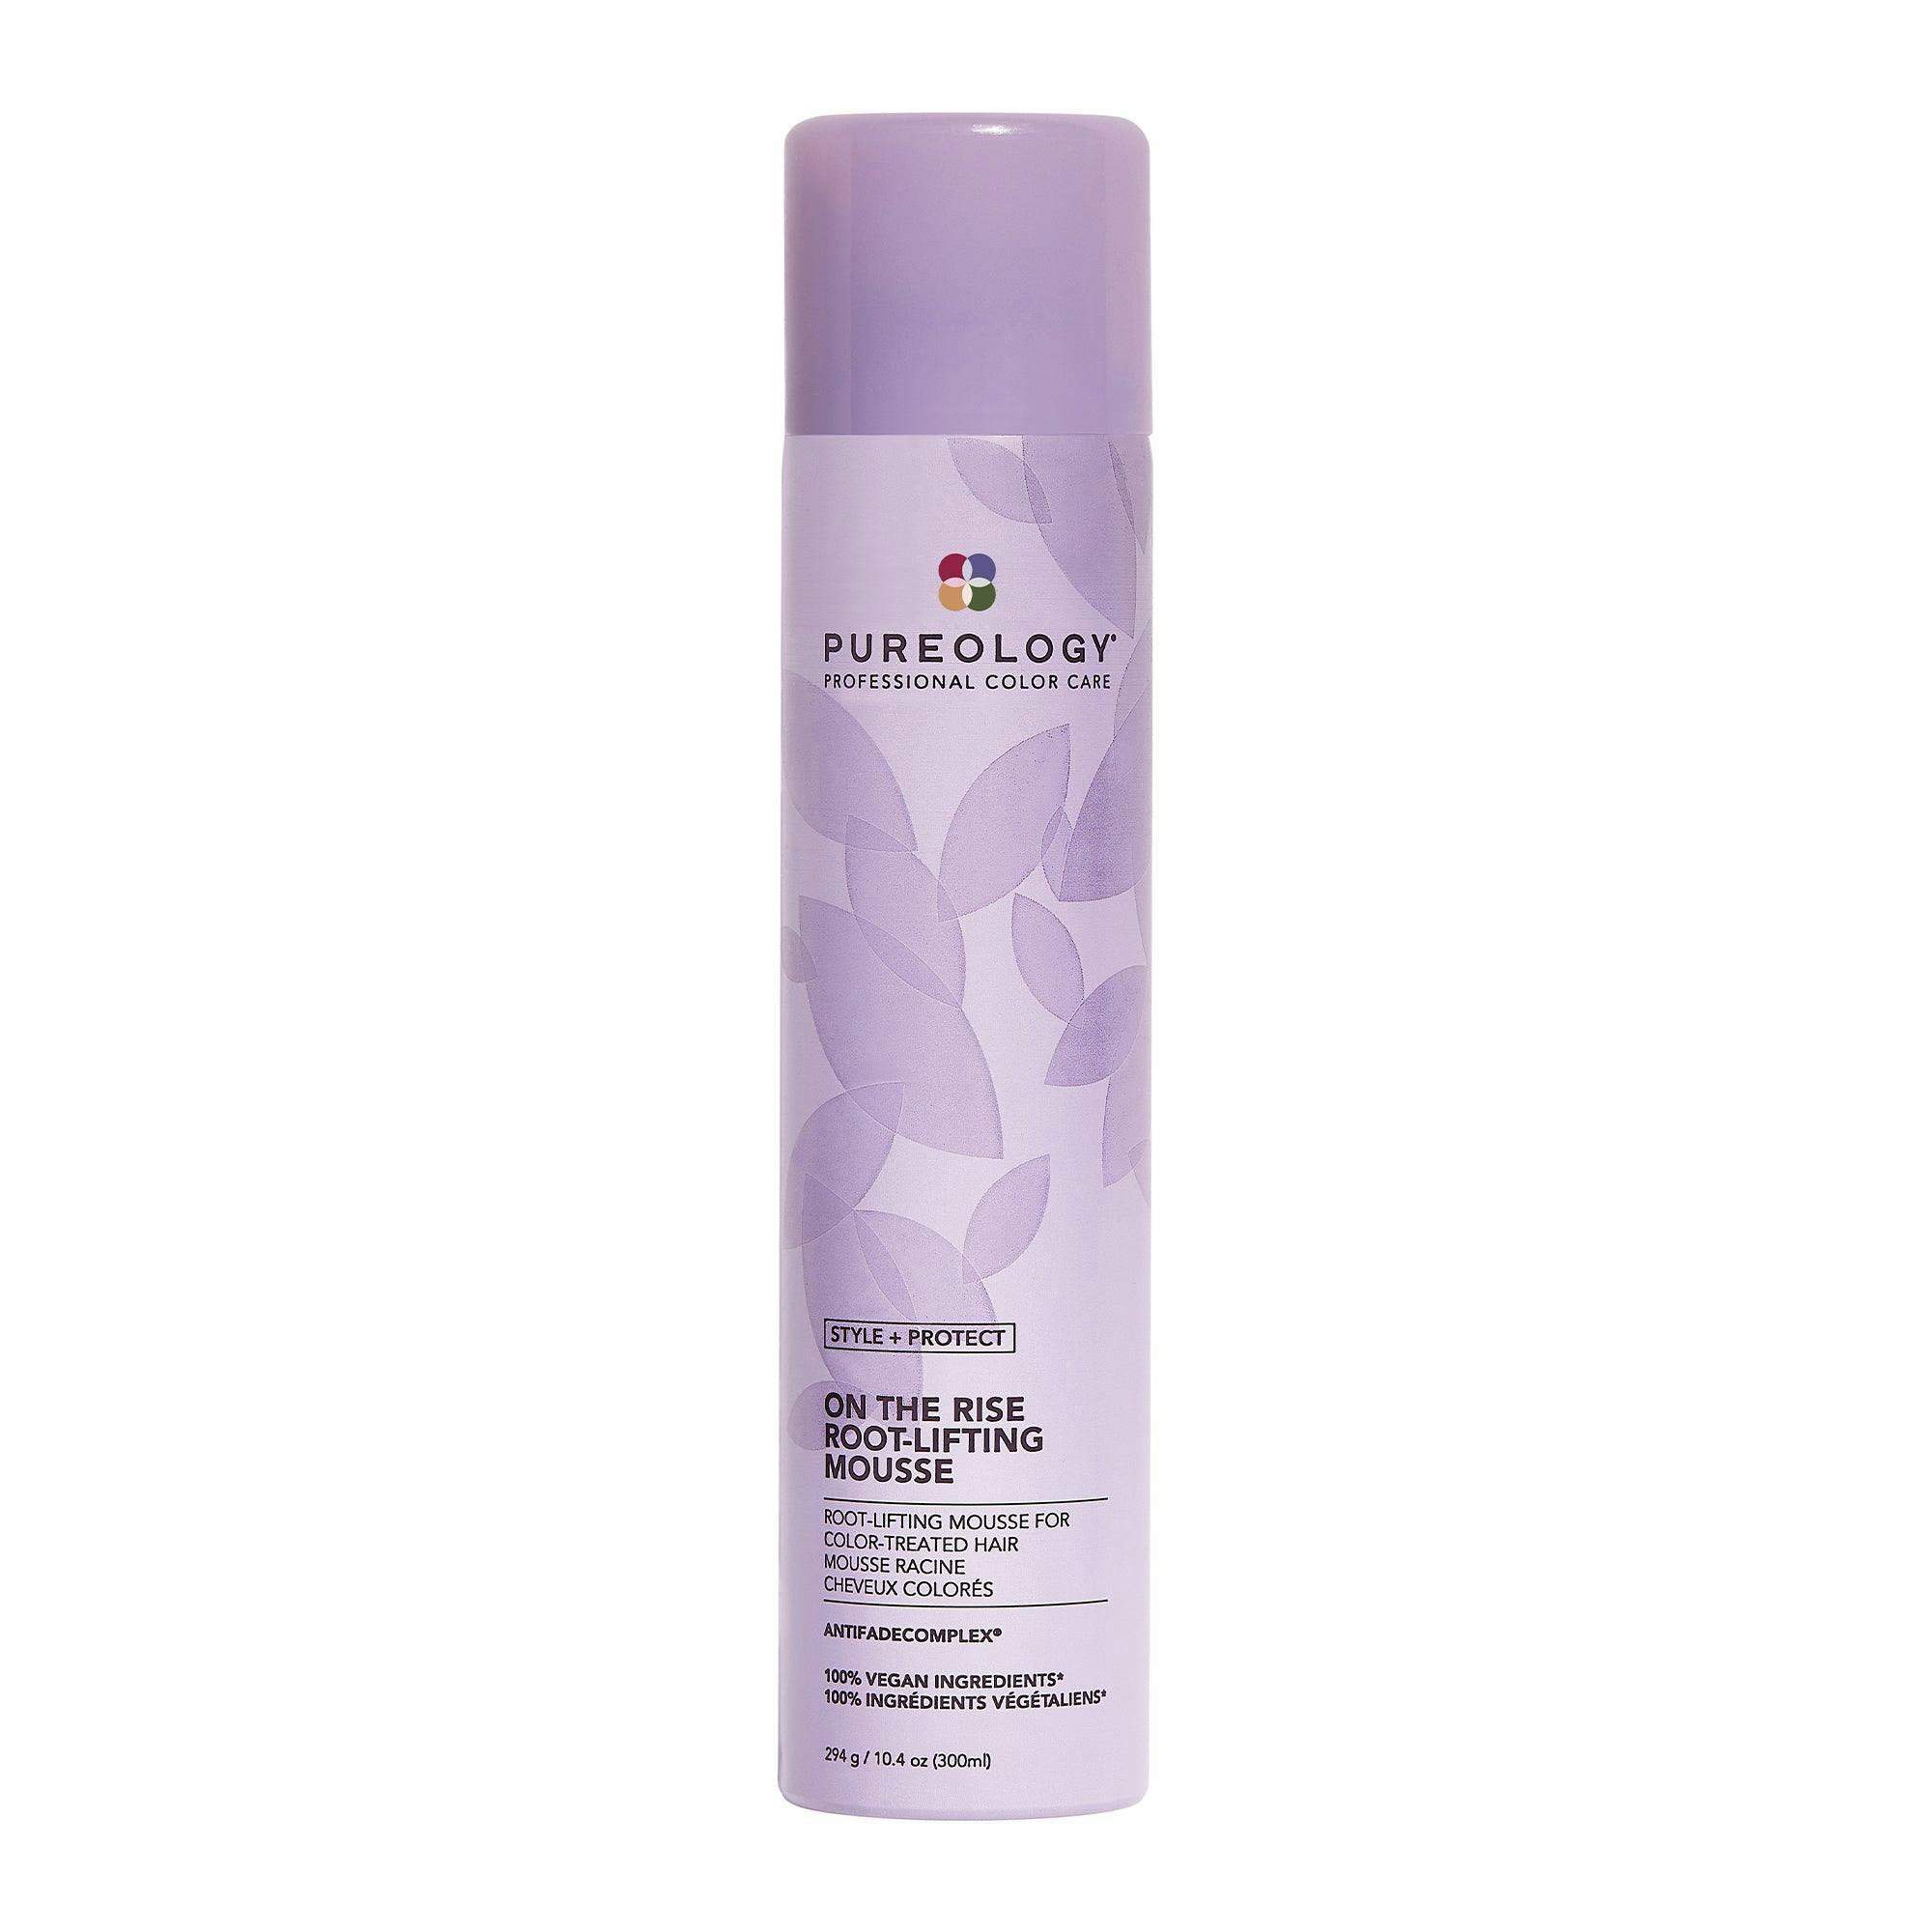 Pureology Style + Protect On the Rise Root-Lifting Mousse 300ml